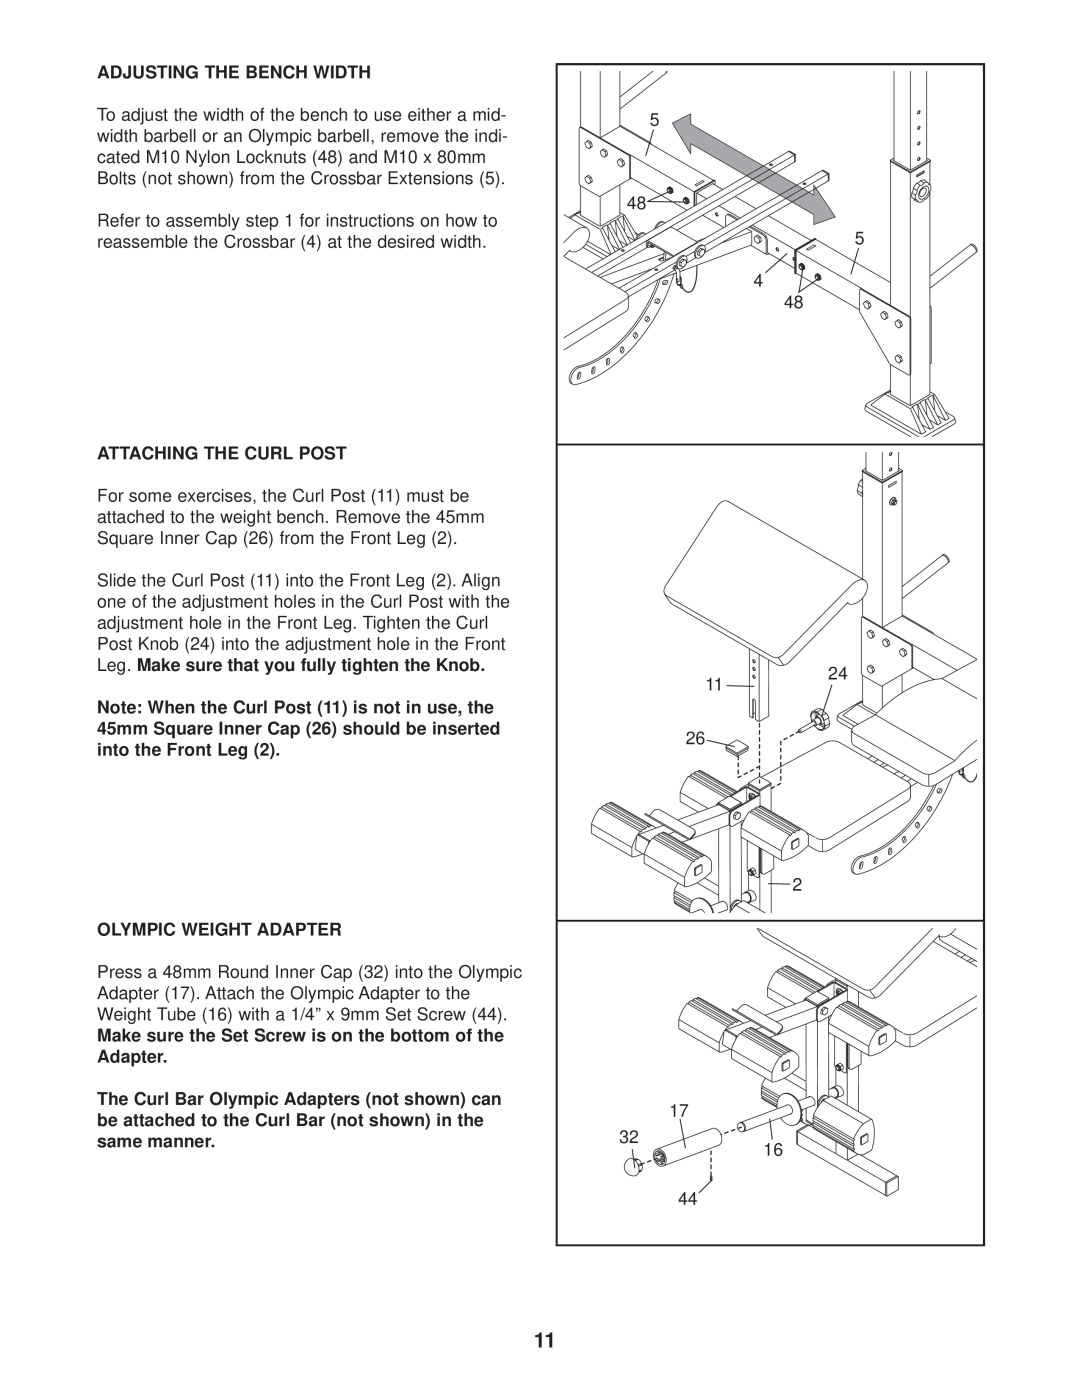 Weider 831.150310 user manual Adjusting The Bench Width, Attaching The Curl Post, Olympic Weight Adapter 